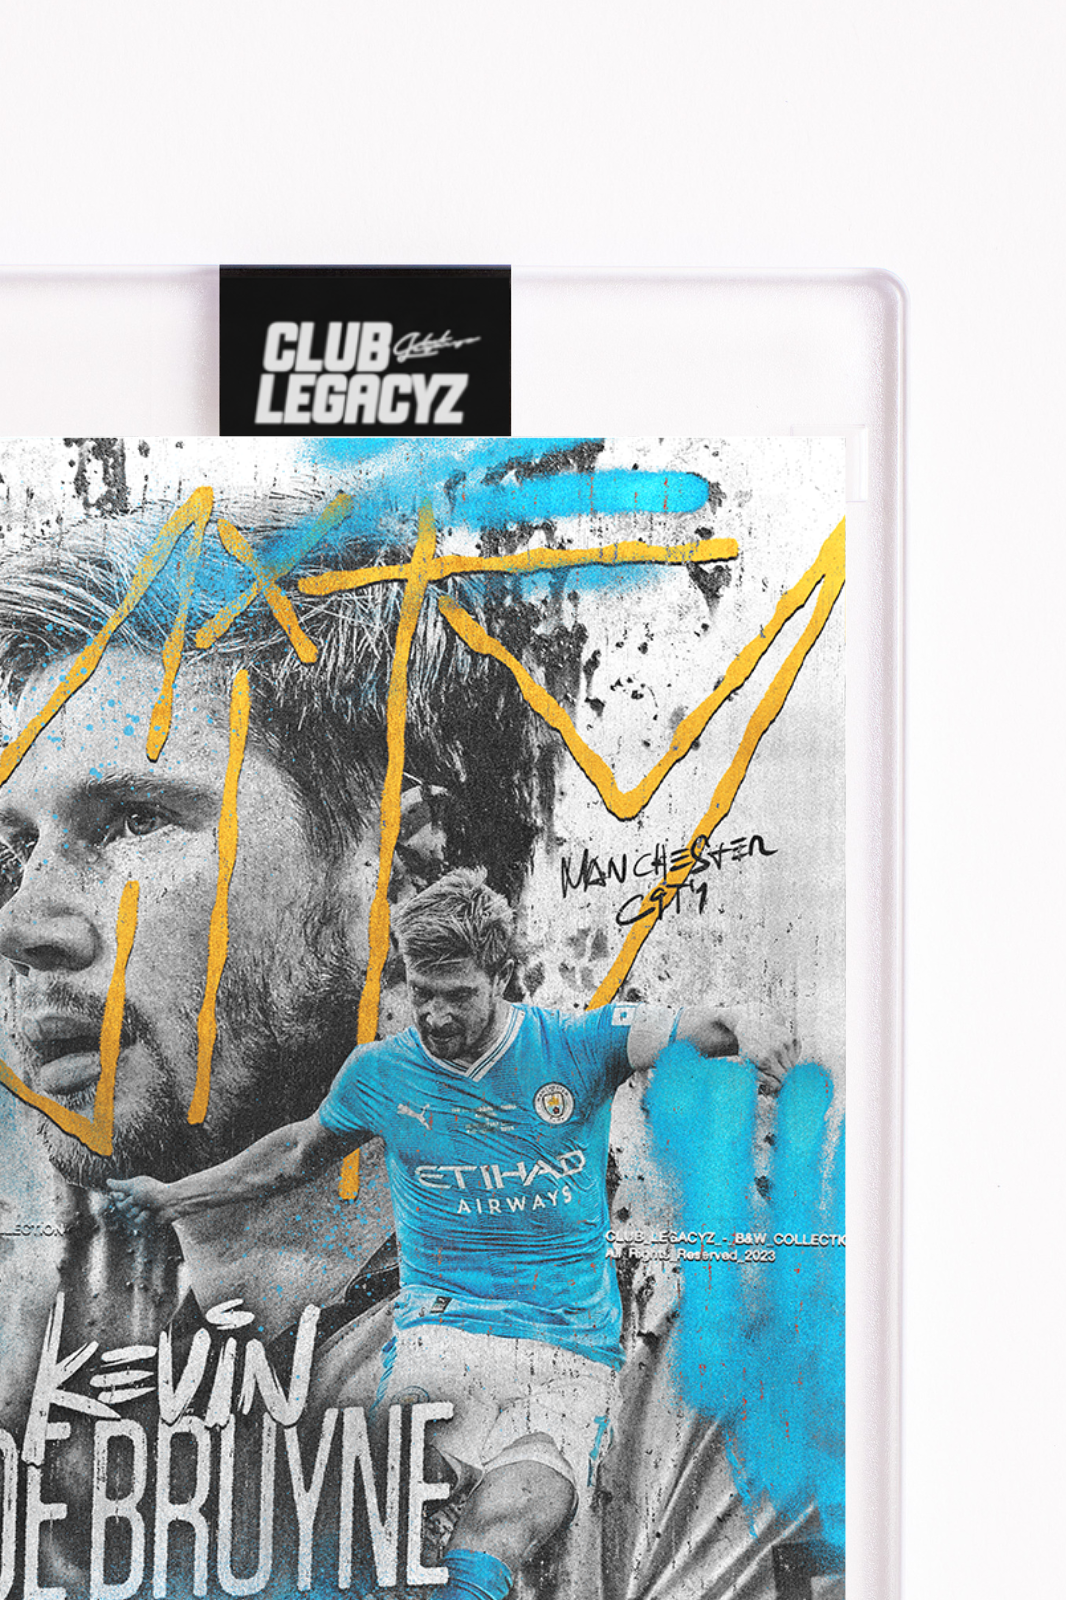 Manchester City - Kevin de Bruyne Black & White Icon limited to 100